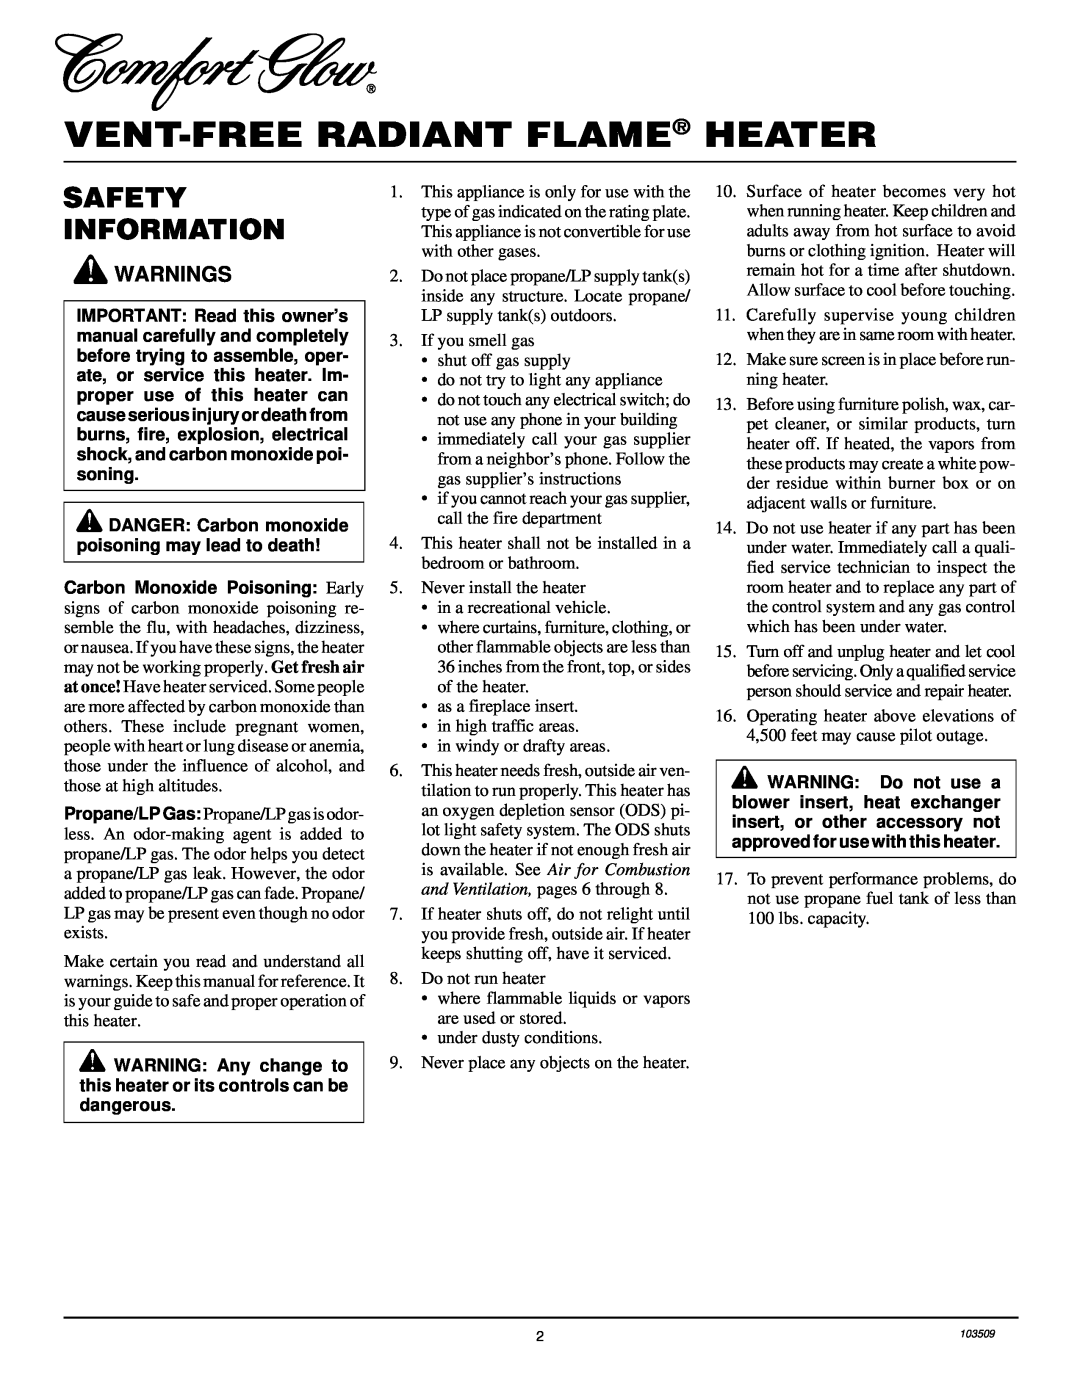 Desa Tech RFP28TC installation manual Vent-Freeradiant Flame Heater, Safety Information, Warnings 